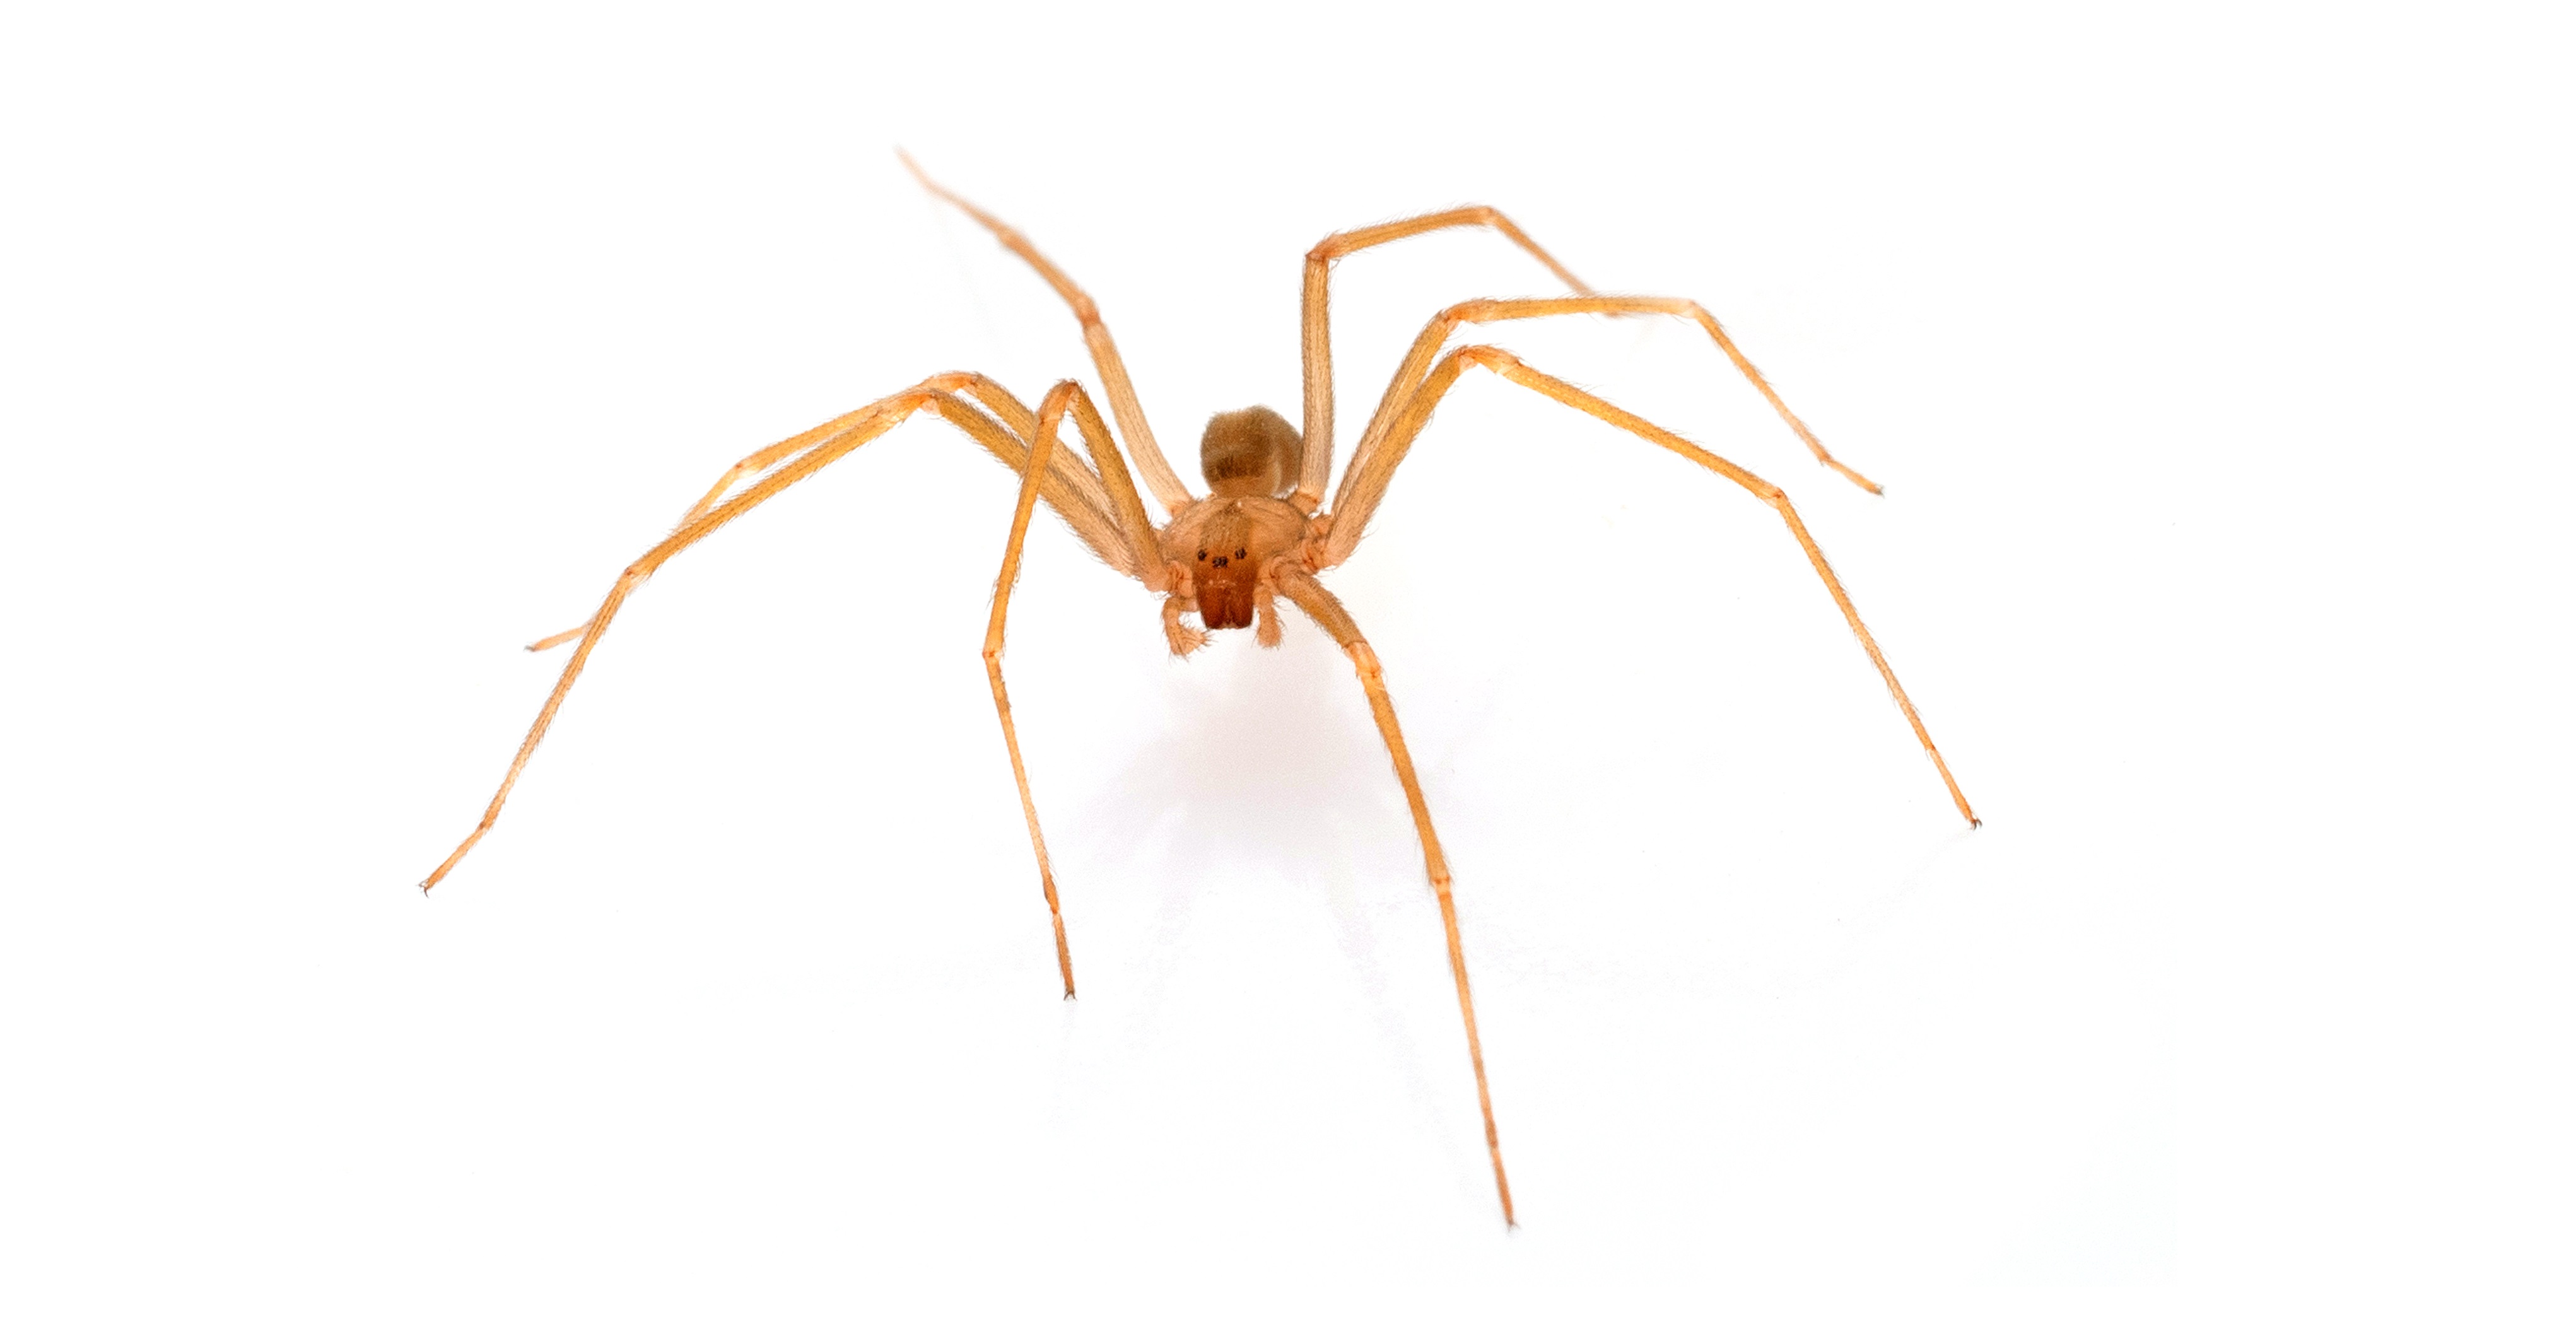 A Brown Recluse Spider Bit Me - Now What? | Mercy